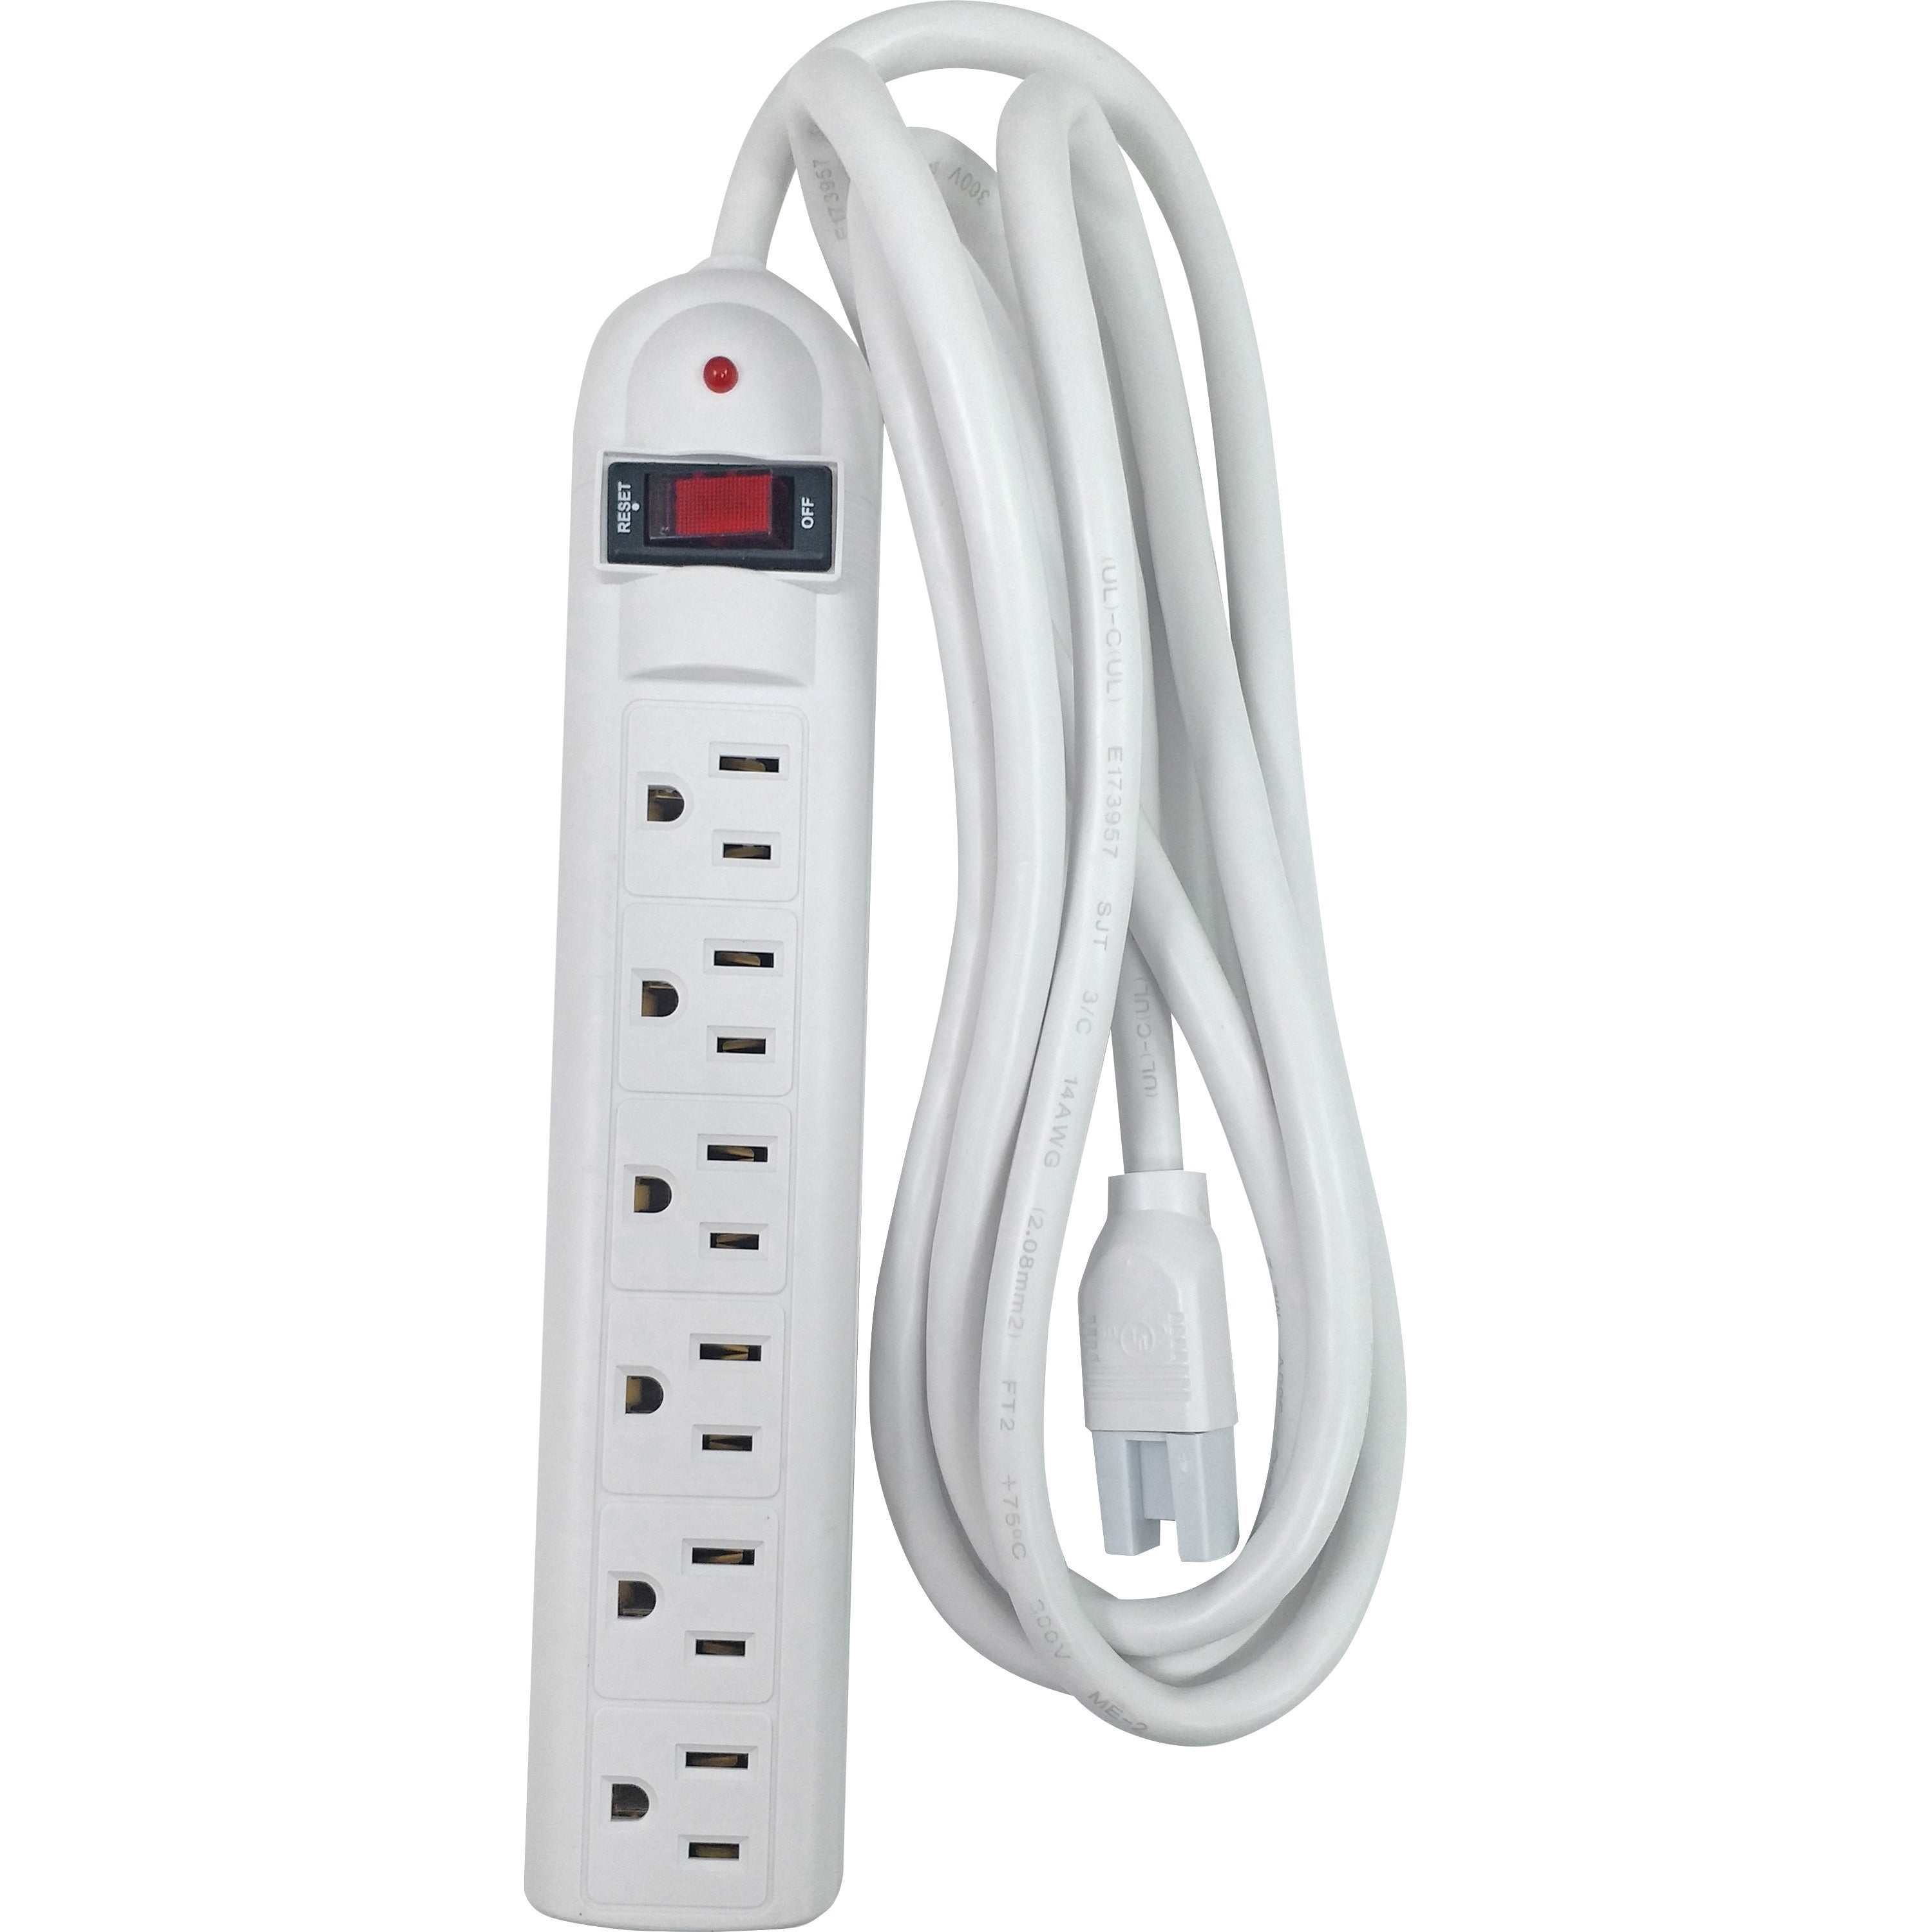 Compucessory 6-Outlet Strip Office Surge Protector - 6 x AC Power - 1080 J - 125 V AC Input - 125 V AC Output - 6 ft - 